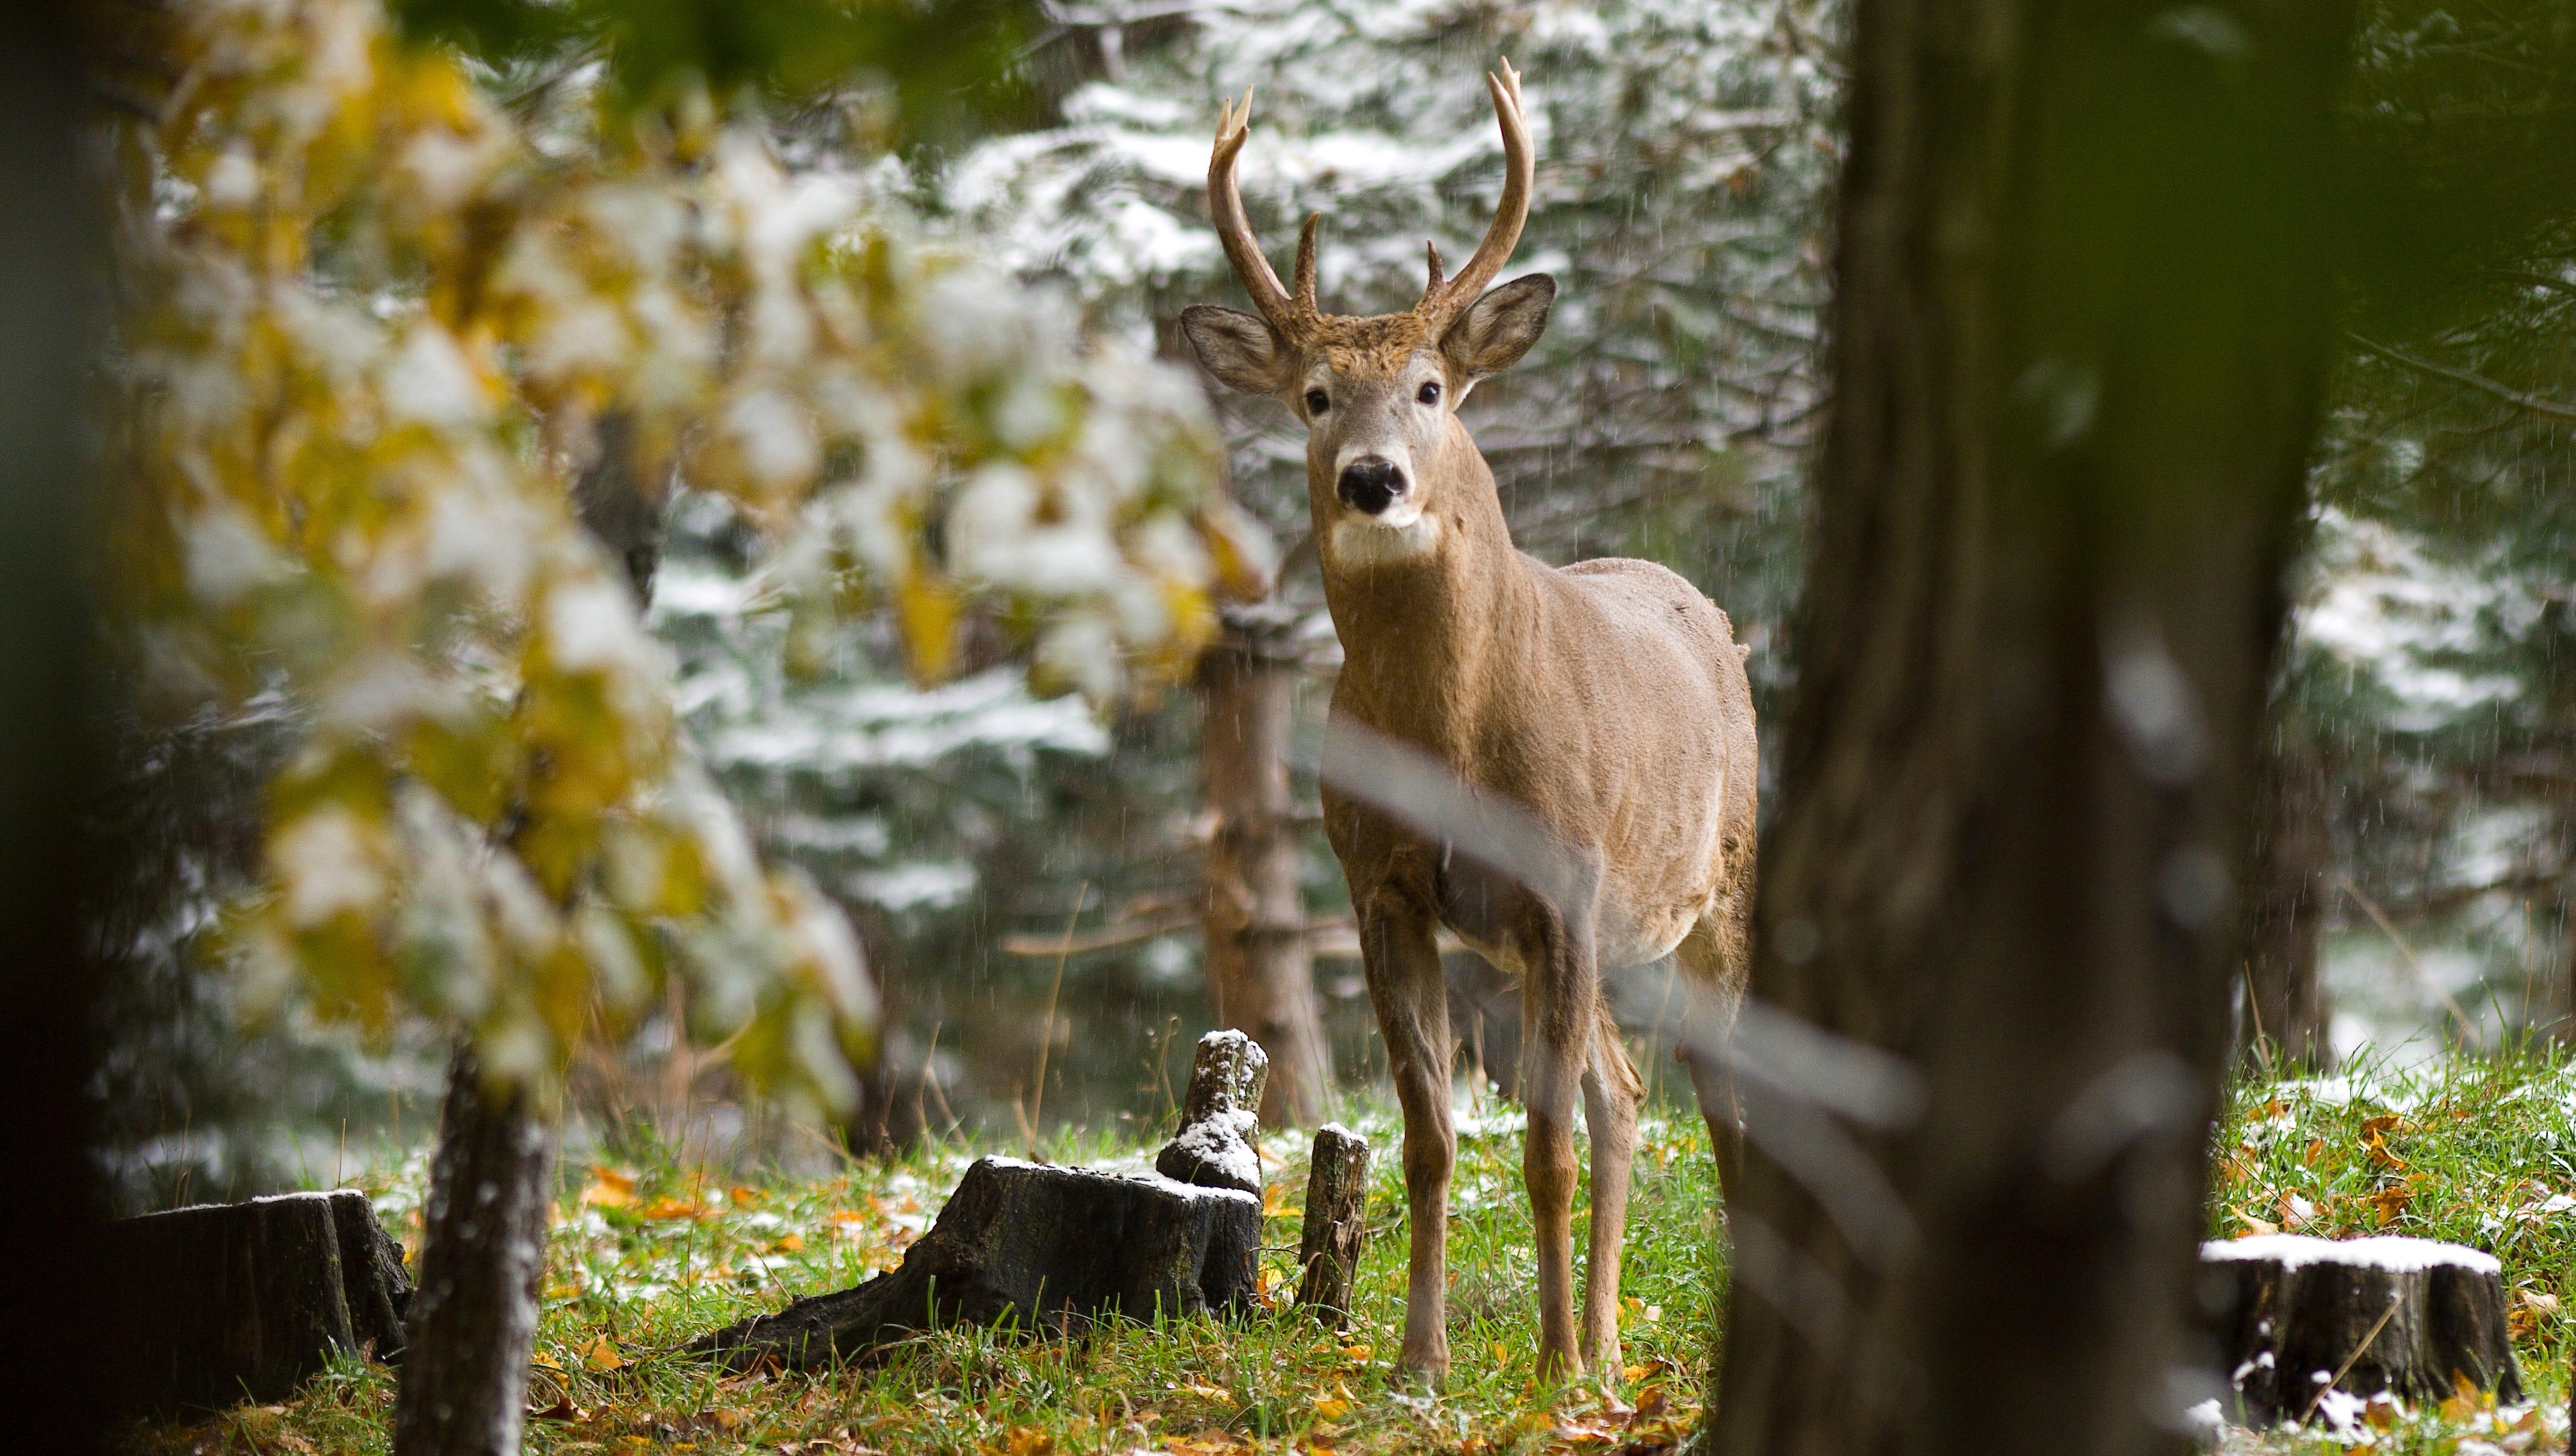 In the 1800s, white-tailed deer were nearing the brink of extinction. Thanks to careful wildlife management practices and hunting regulations, the species has since rebounded and continues to be carefully managed.